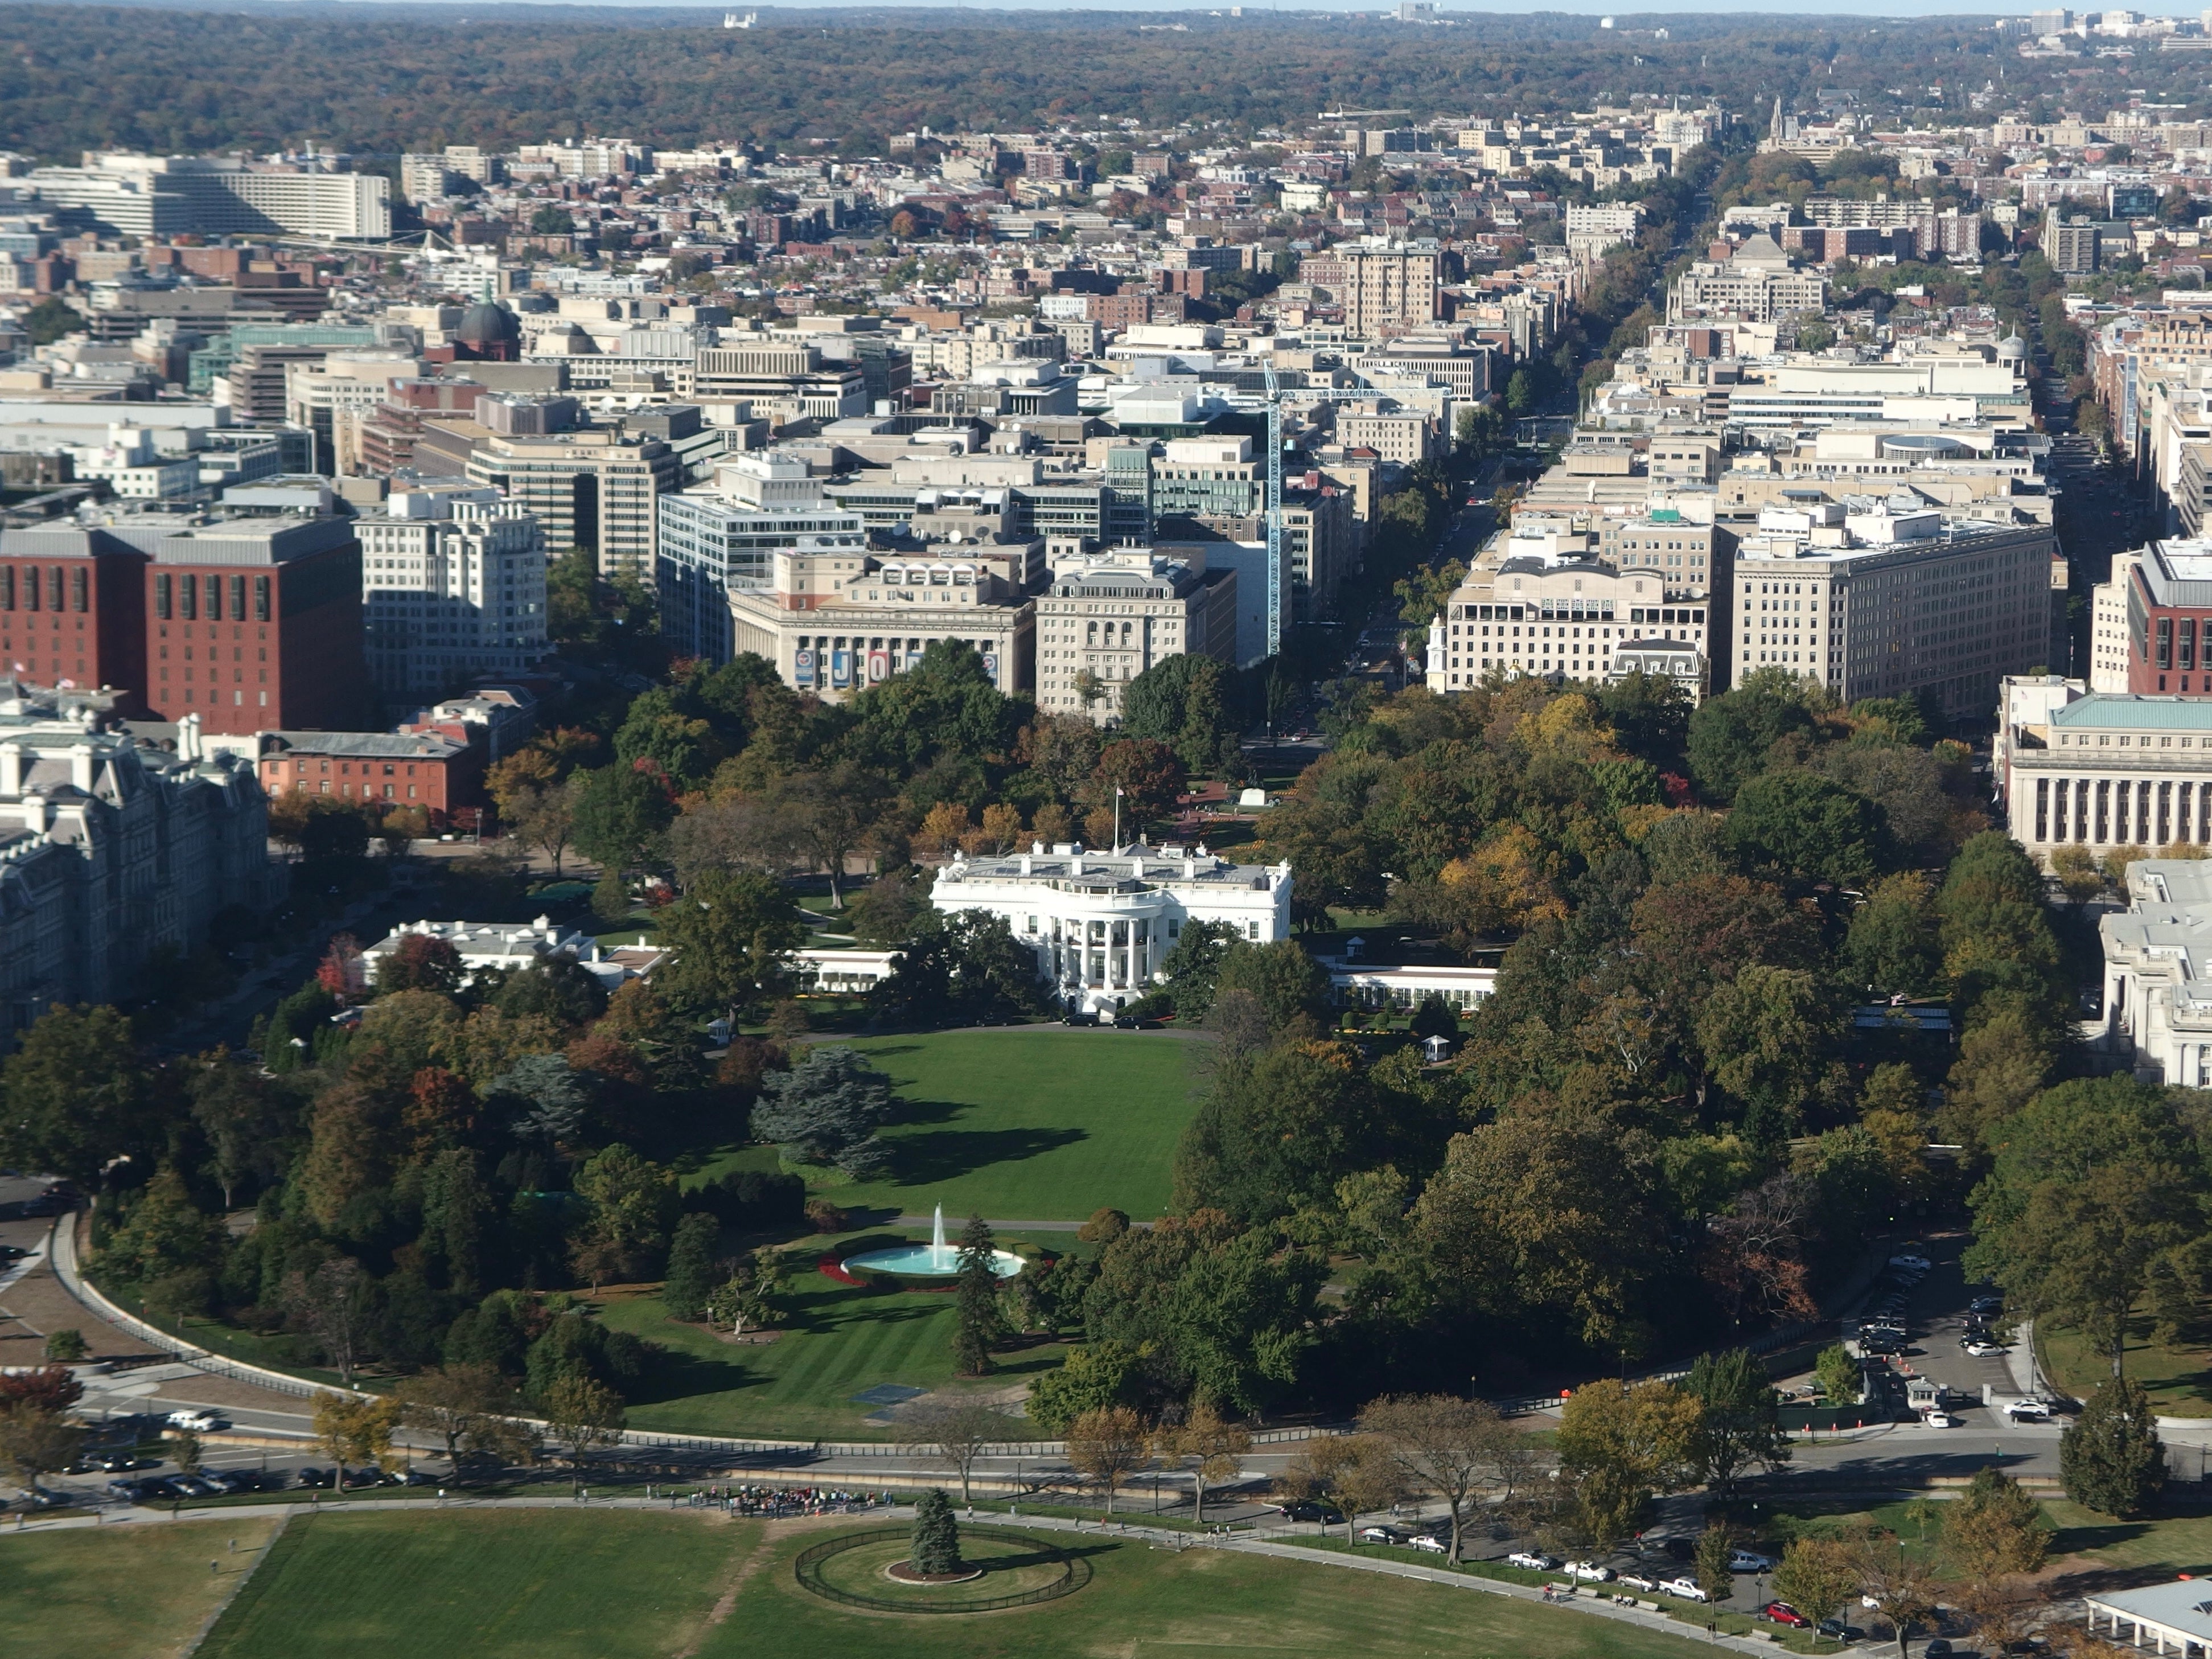 Capital attraction: Washington DC, with the White House in the foreground